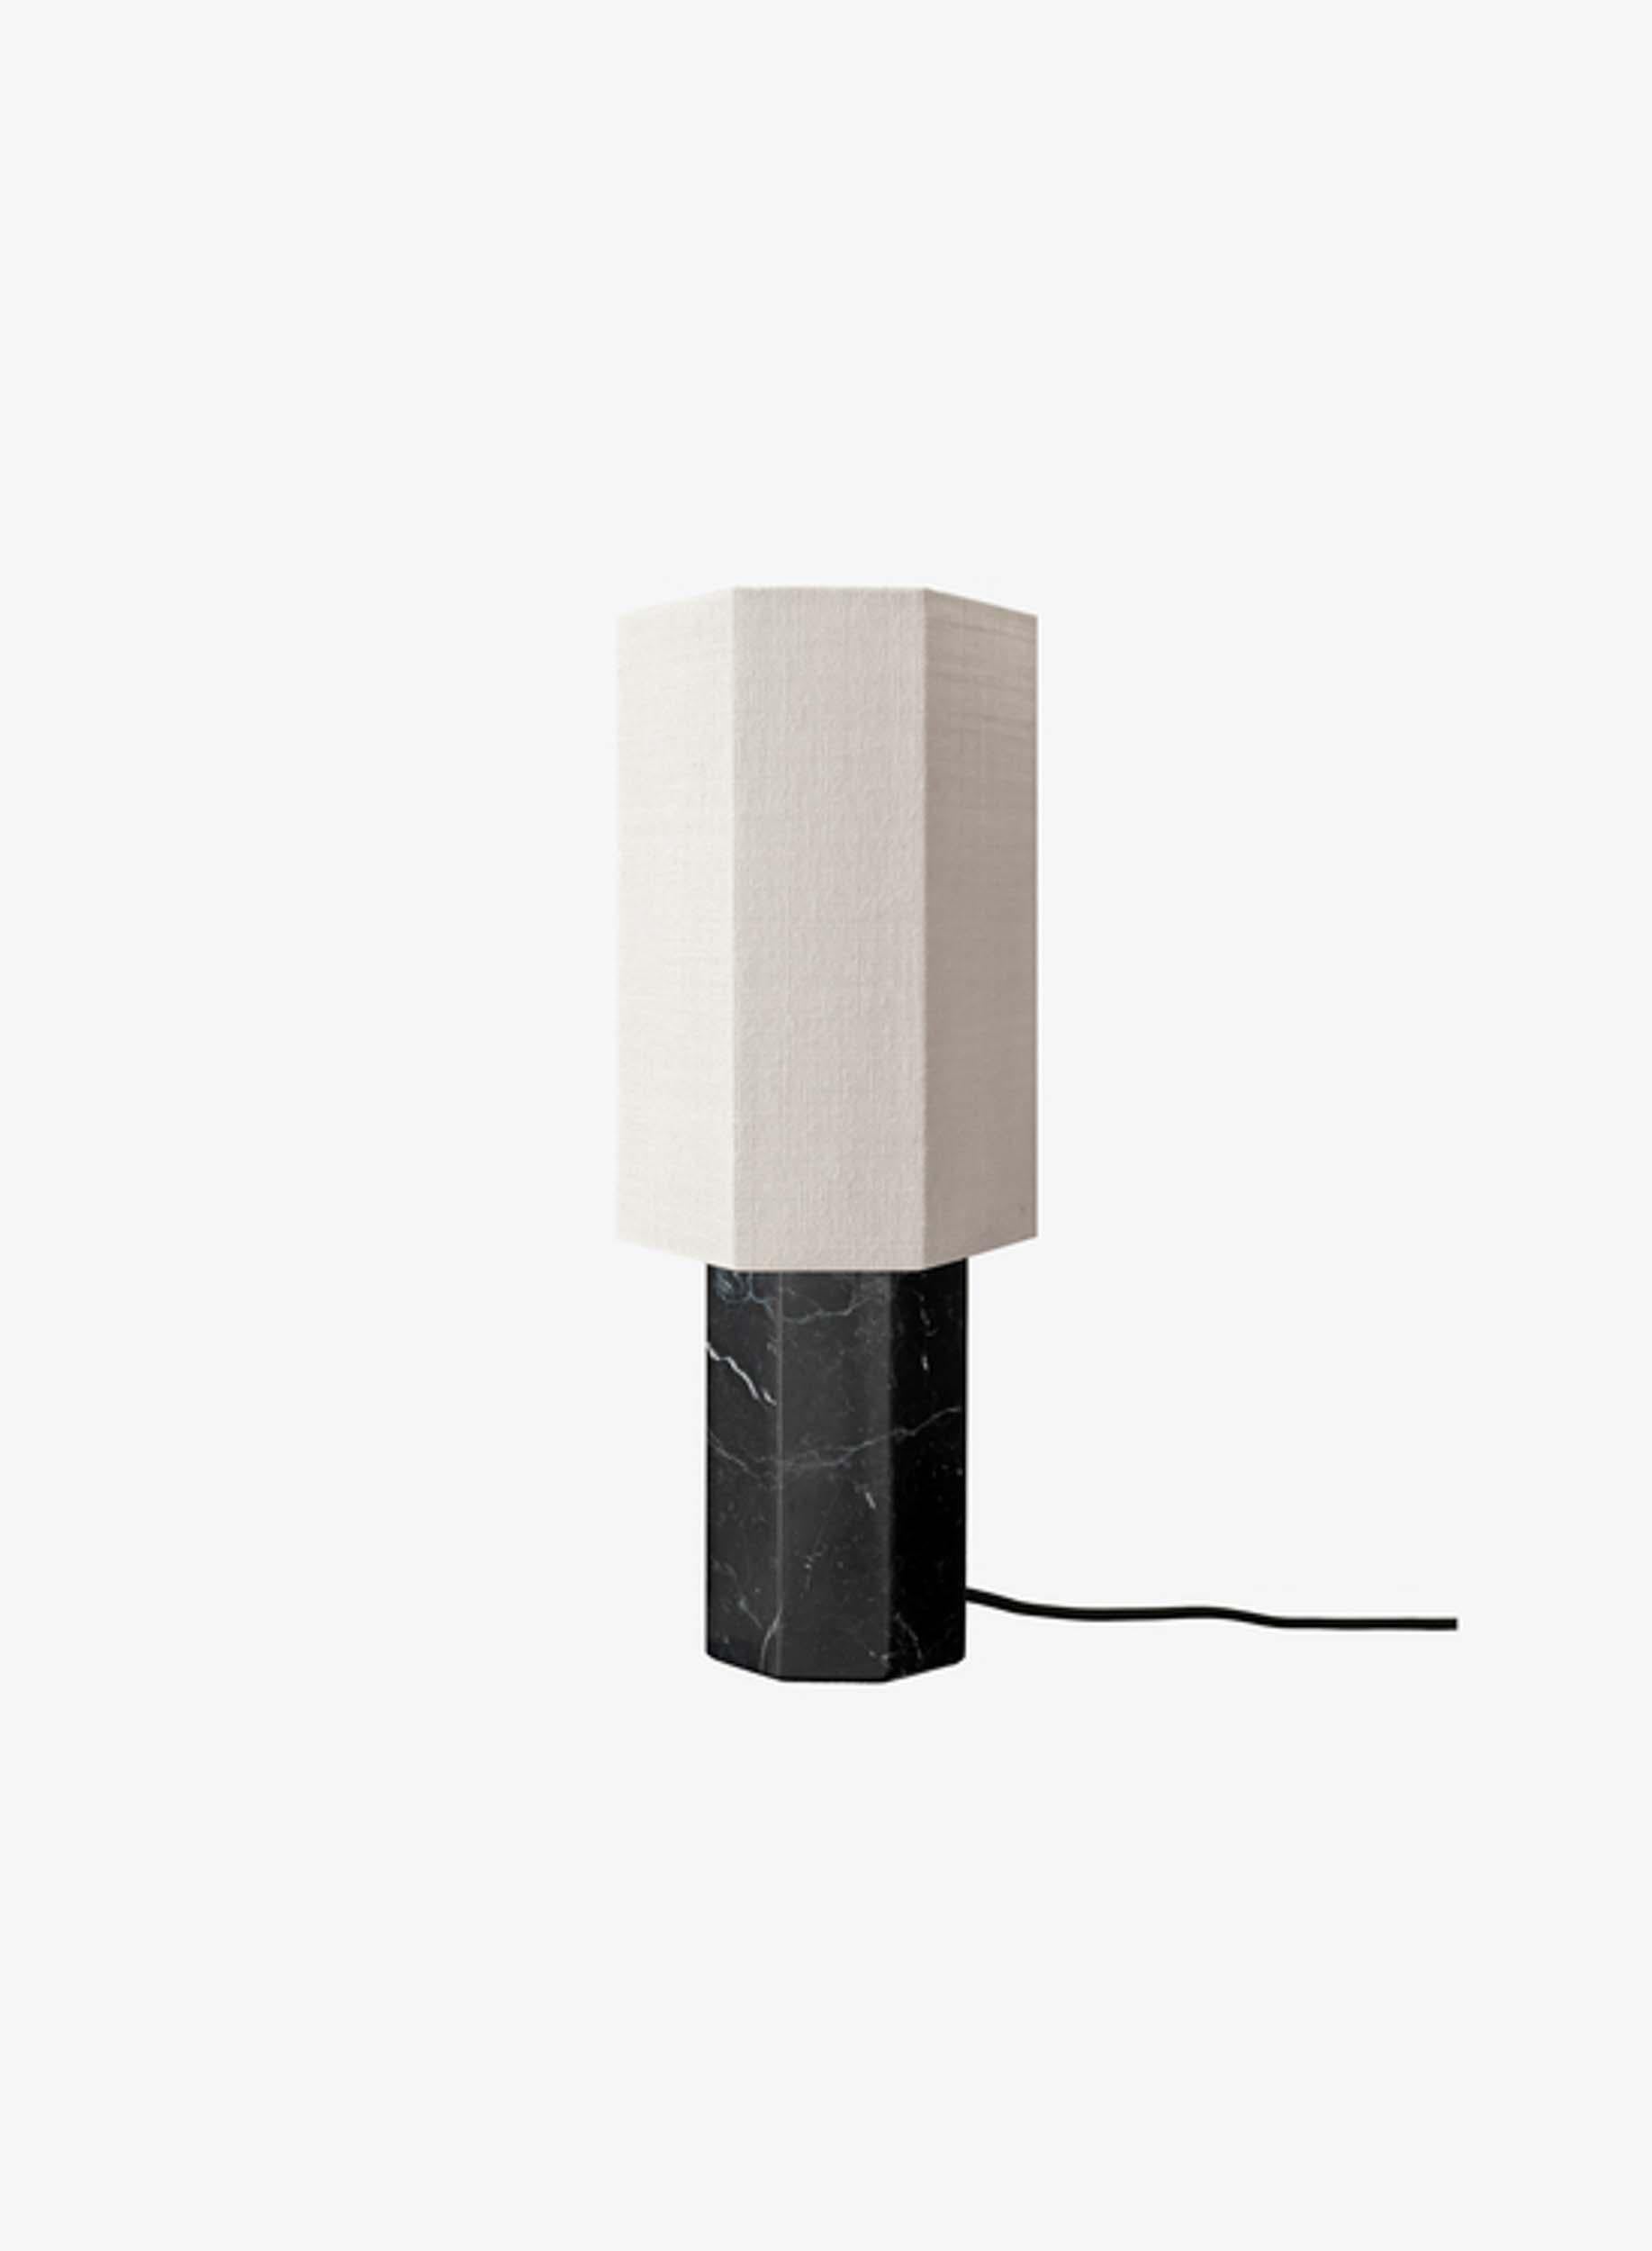 Table Lamp 'The Eight over Eight' by Louise Roe 

Designed in Denmark and manufactured in Italy.

Model shown in the picture: 
Base: Black marble
Lampshade: Jute White 

Dimensions : 
Height: 36 cm
Diameter: 12.5 cm

Louise Roe is a